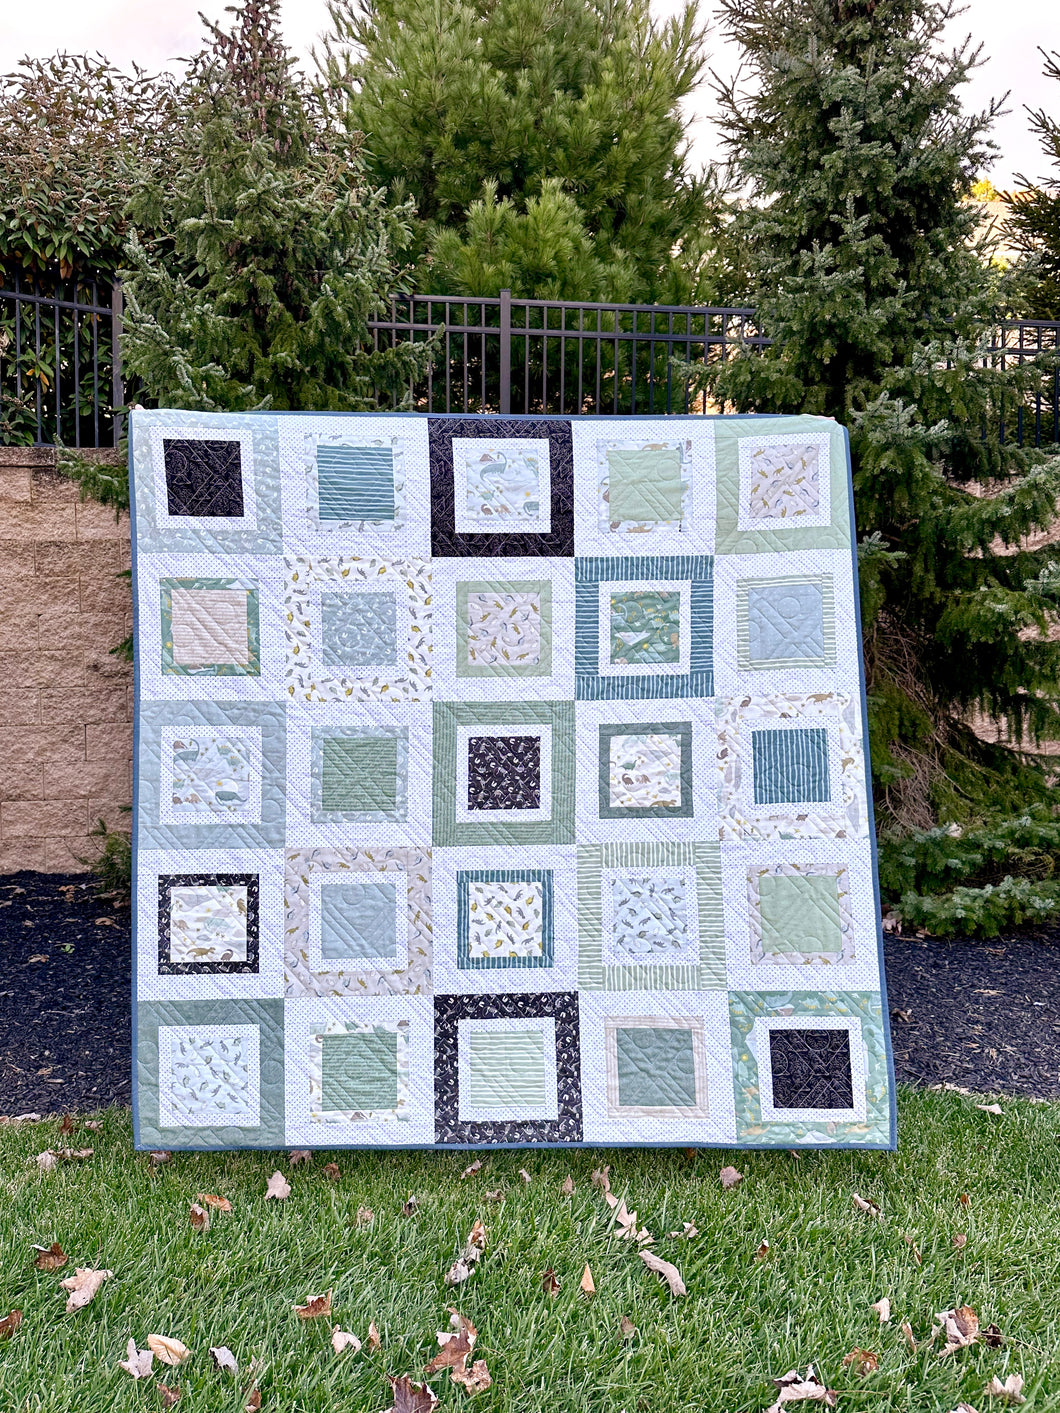 The Flip Side Dinosaur Throw Quilt Kit - Pattern by Lindsey Weight of Primrose Cottage Quilts